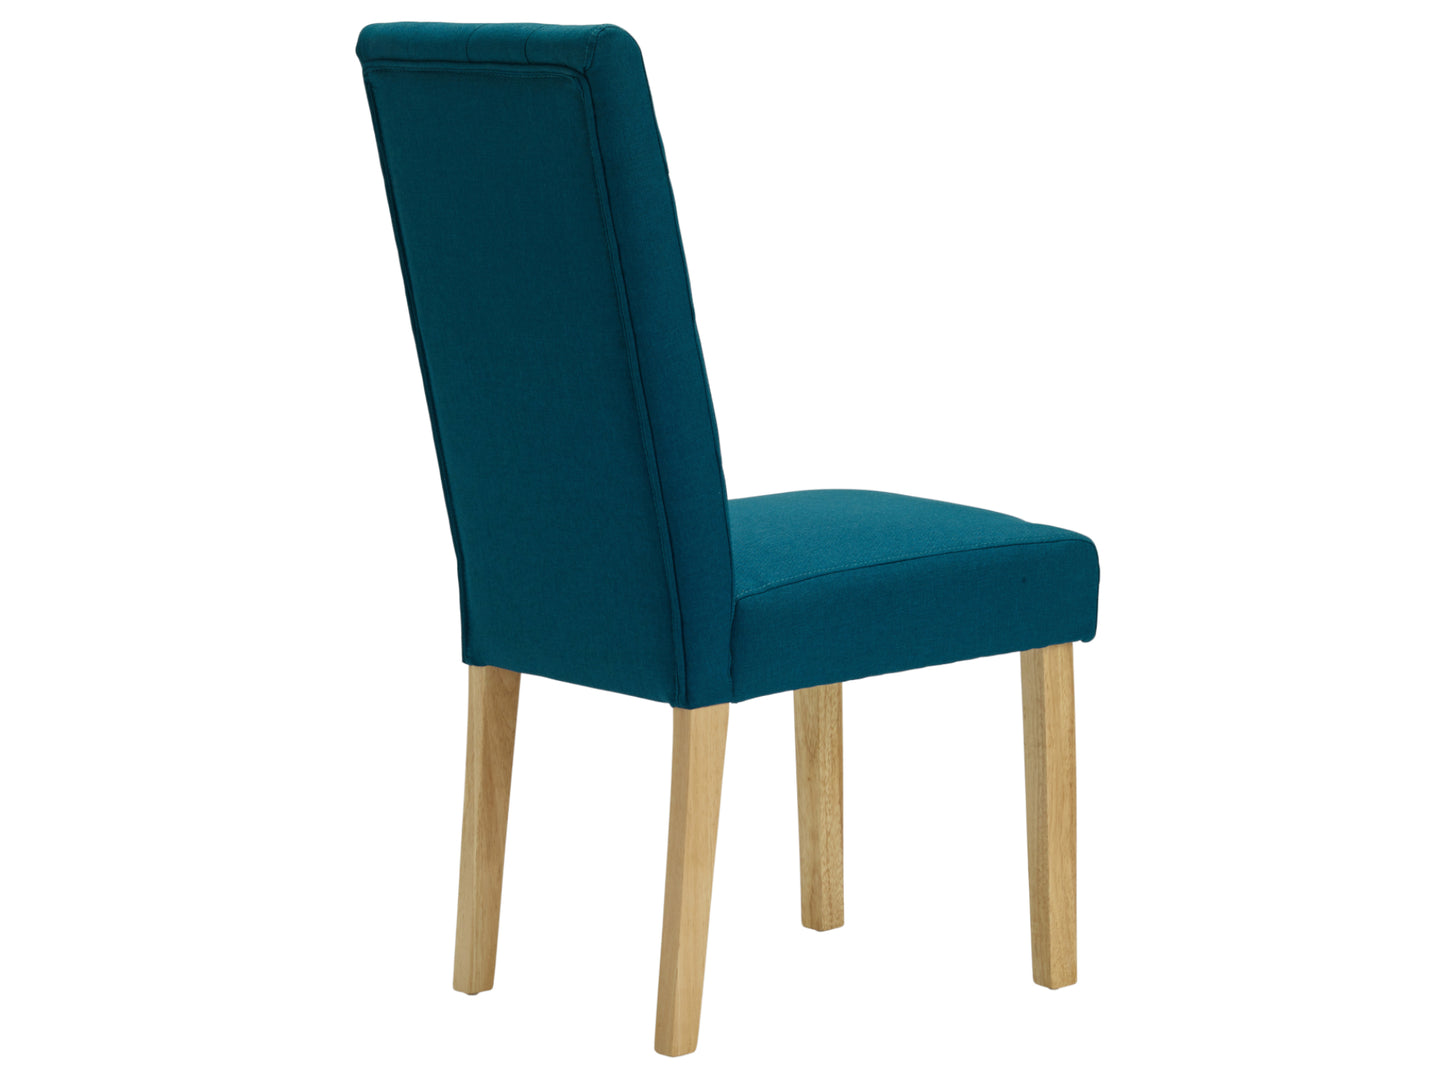 Roma Dining Chair in Teal (2 Pack)